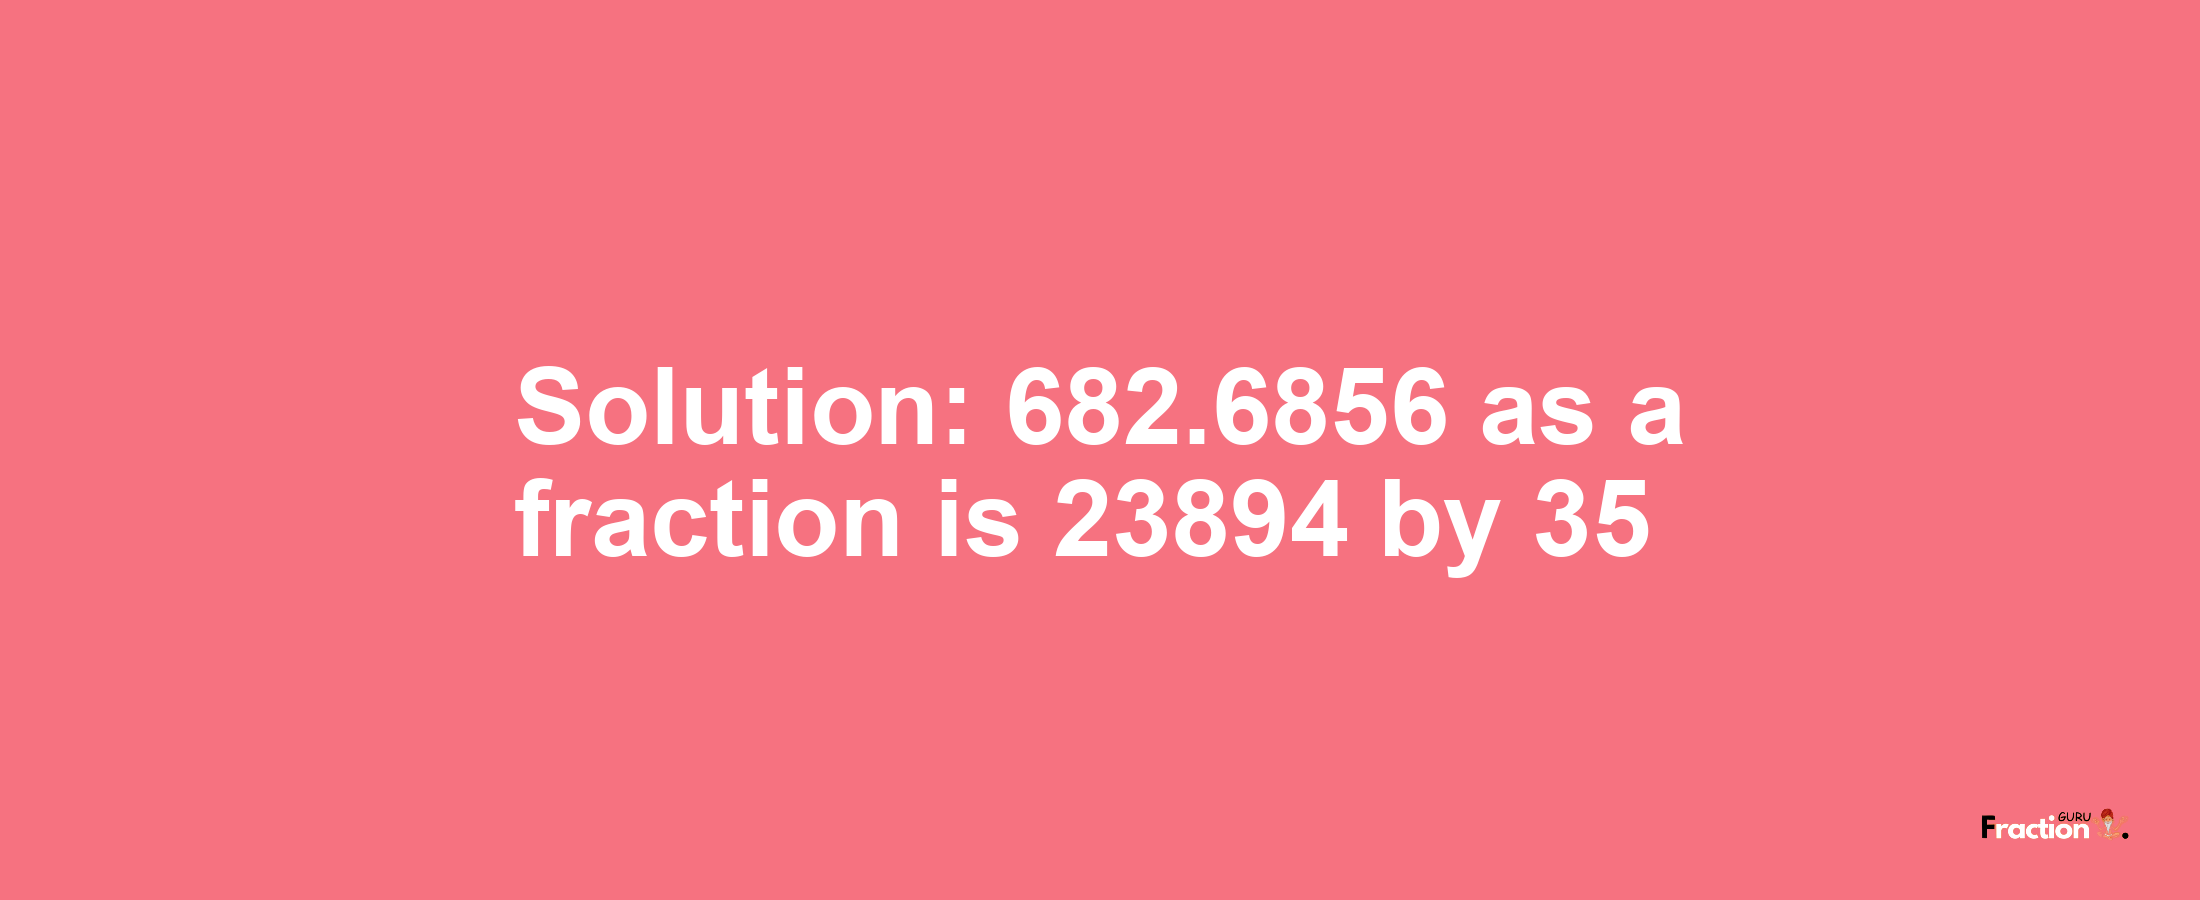 Solution:682.6856 as a fraction is 23894/35